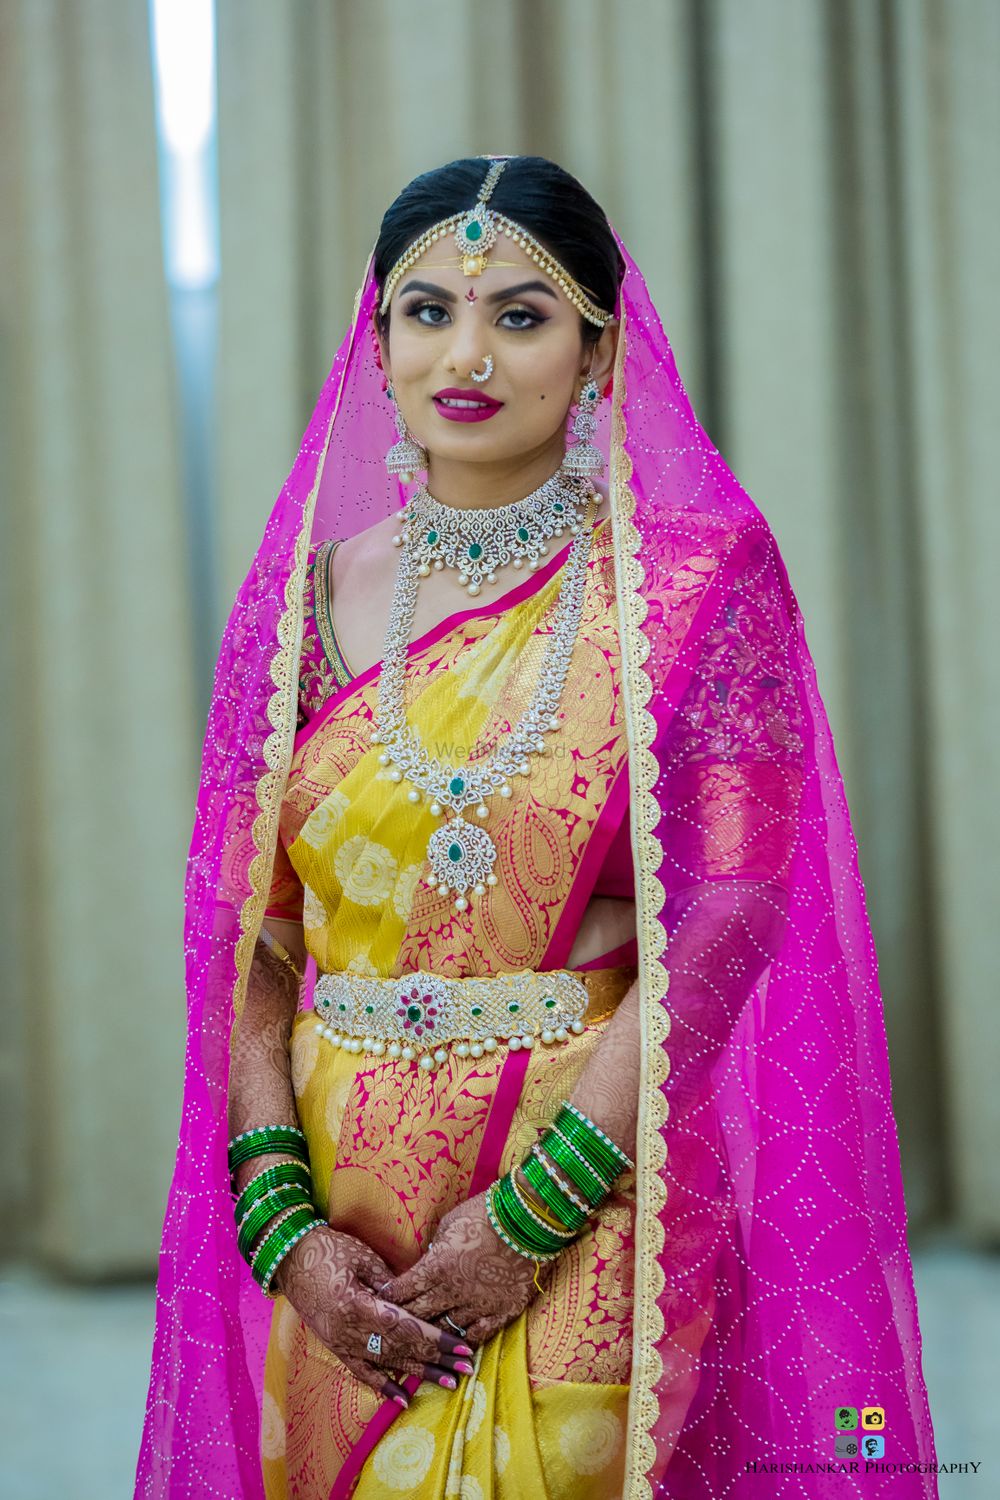 Photo of South Indian bride in yellow saree and diamond jewellery